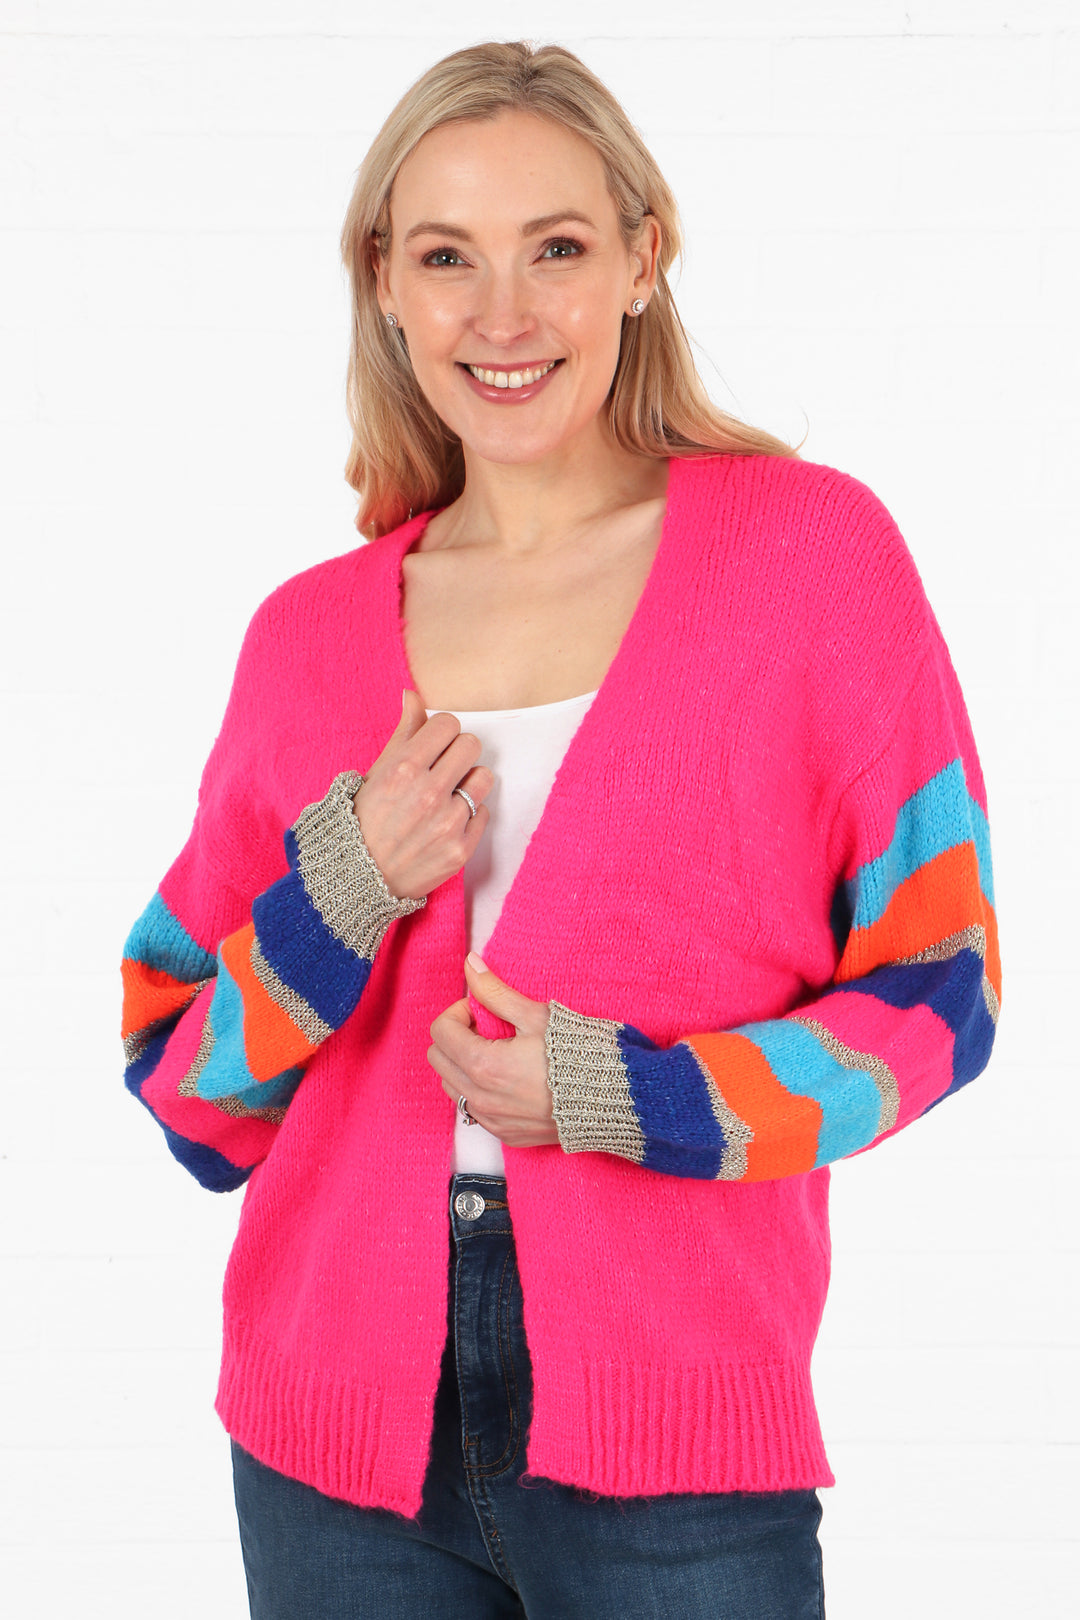 model wearing a fuchsia pink open front cardigan with multicoloured striped sleeves, the sleeves are light blue, dark blue, orange and gold glitter striped